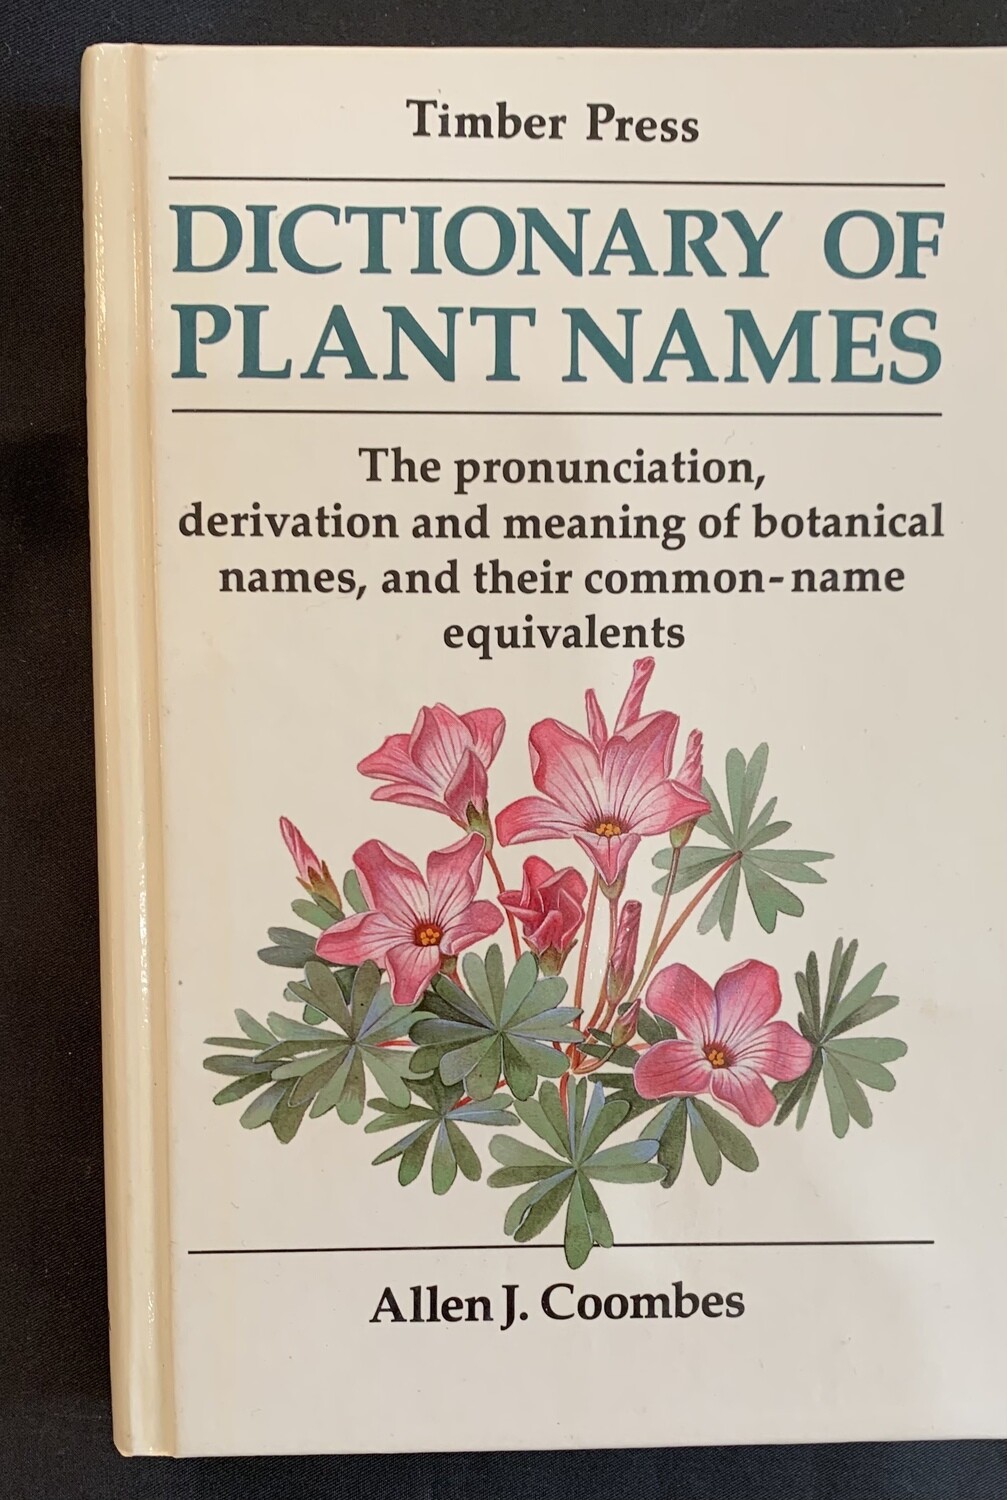 Dictionary Of Plants Names